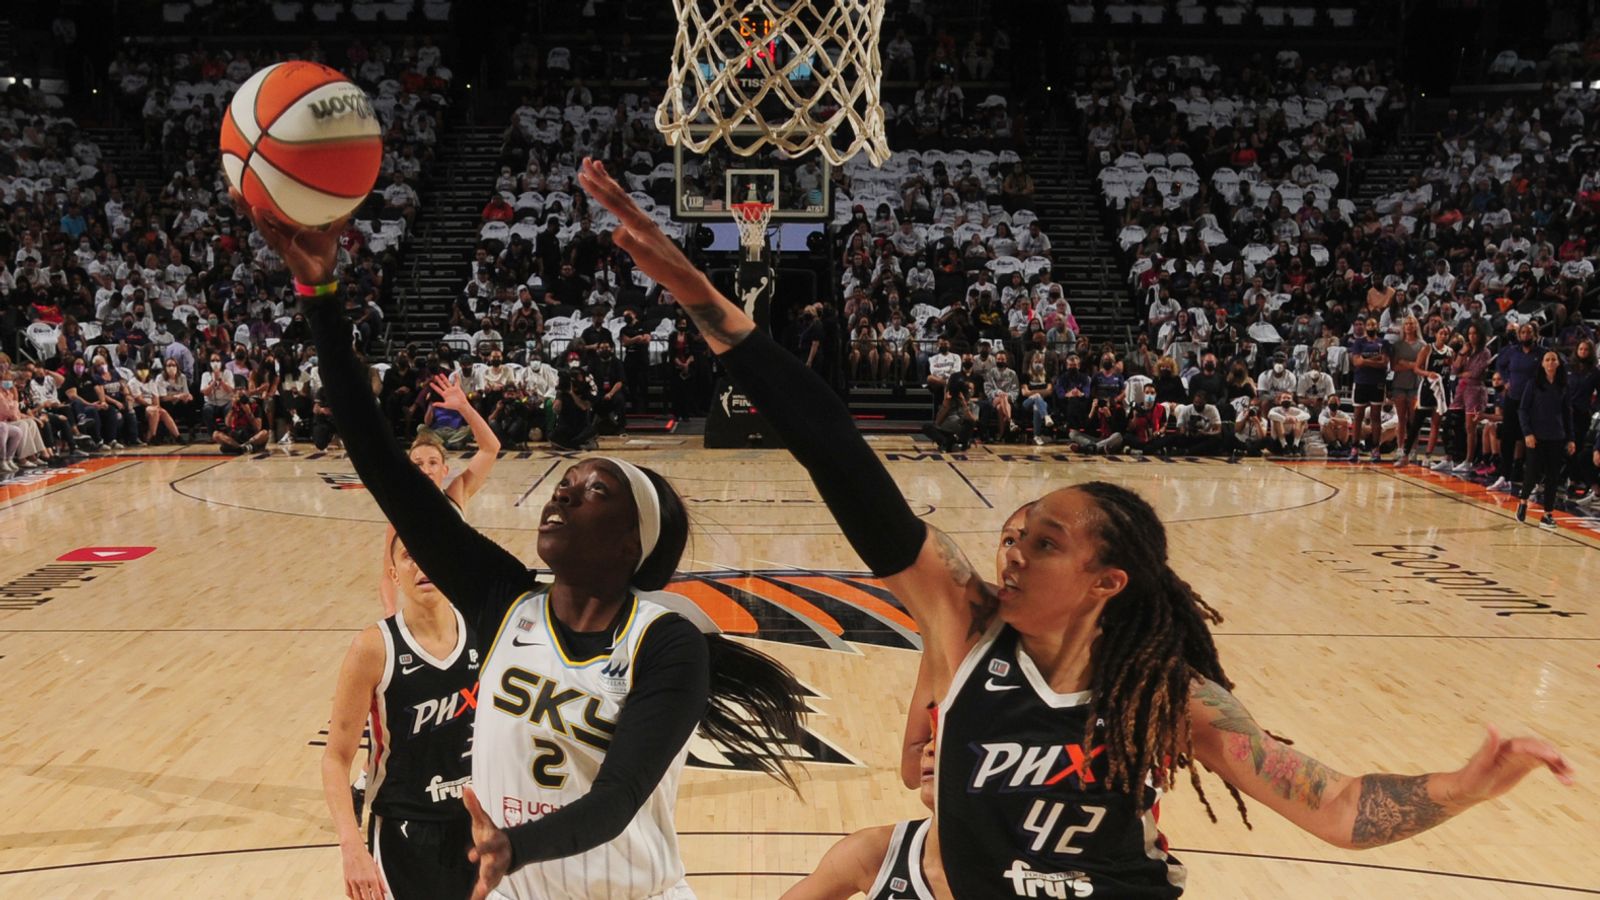 Chicago Sky's Kahleah Copper Covers SLAM 236